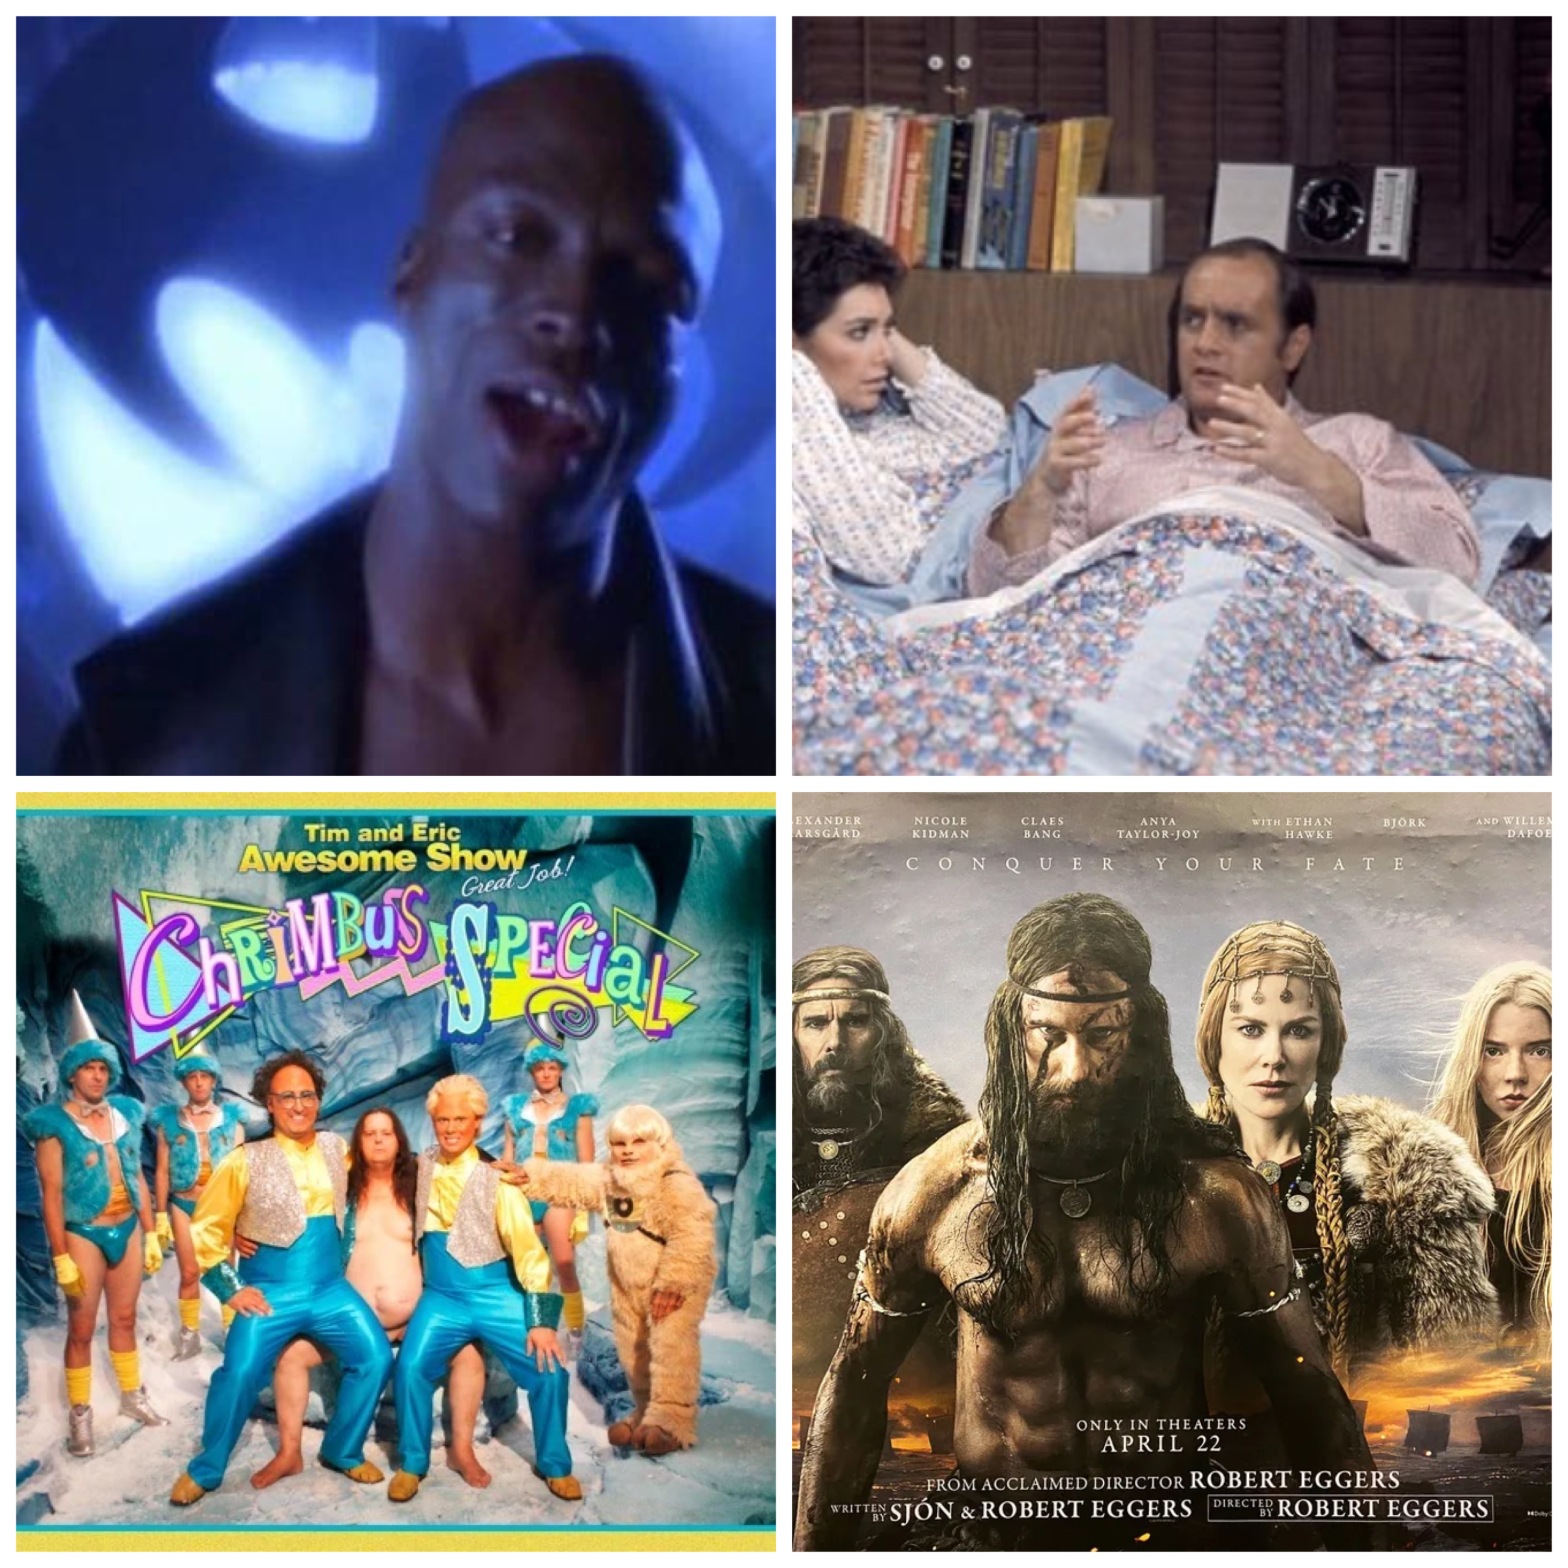 Seal singing Kiss From A Rose in front of the Batsignal, Bob Newhart in Newhart, Tim and Eric's Chrimbus Special, and a titleless poster for The Northman.